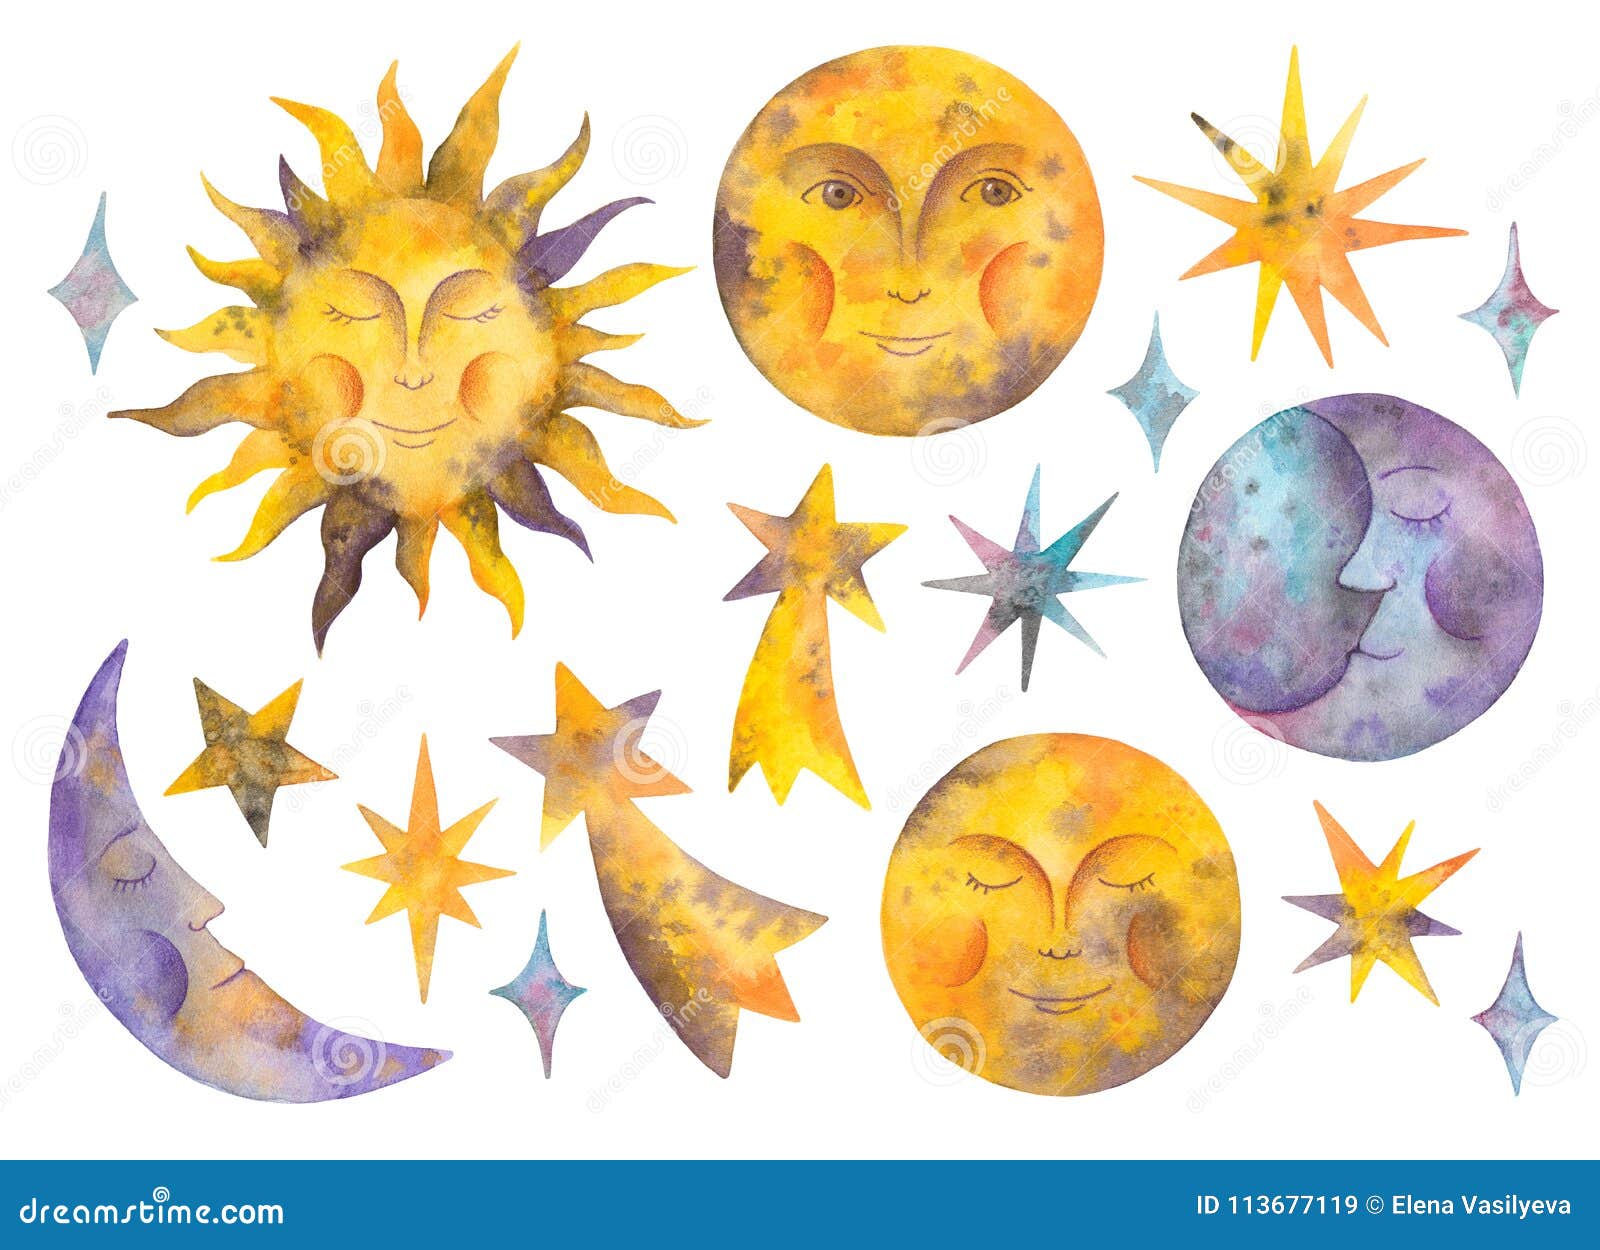 watercolor sun, moon, stars and celestial bodies